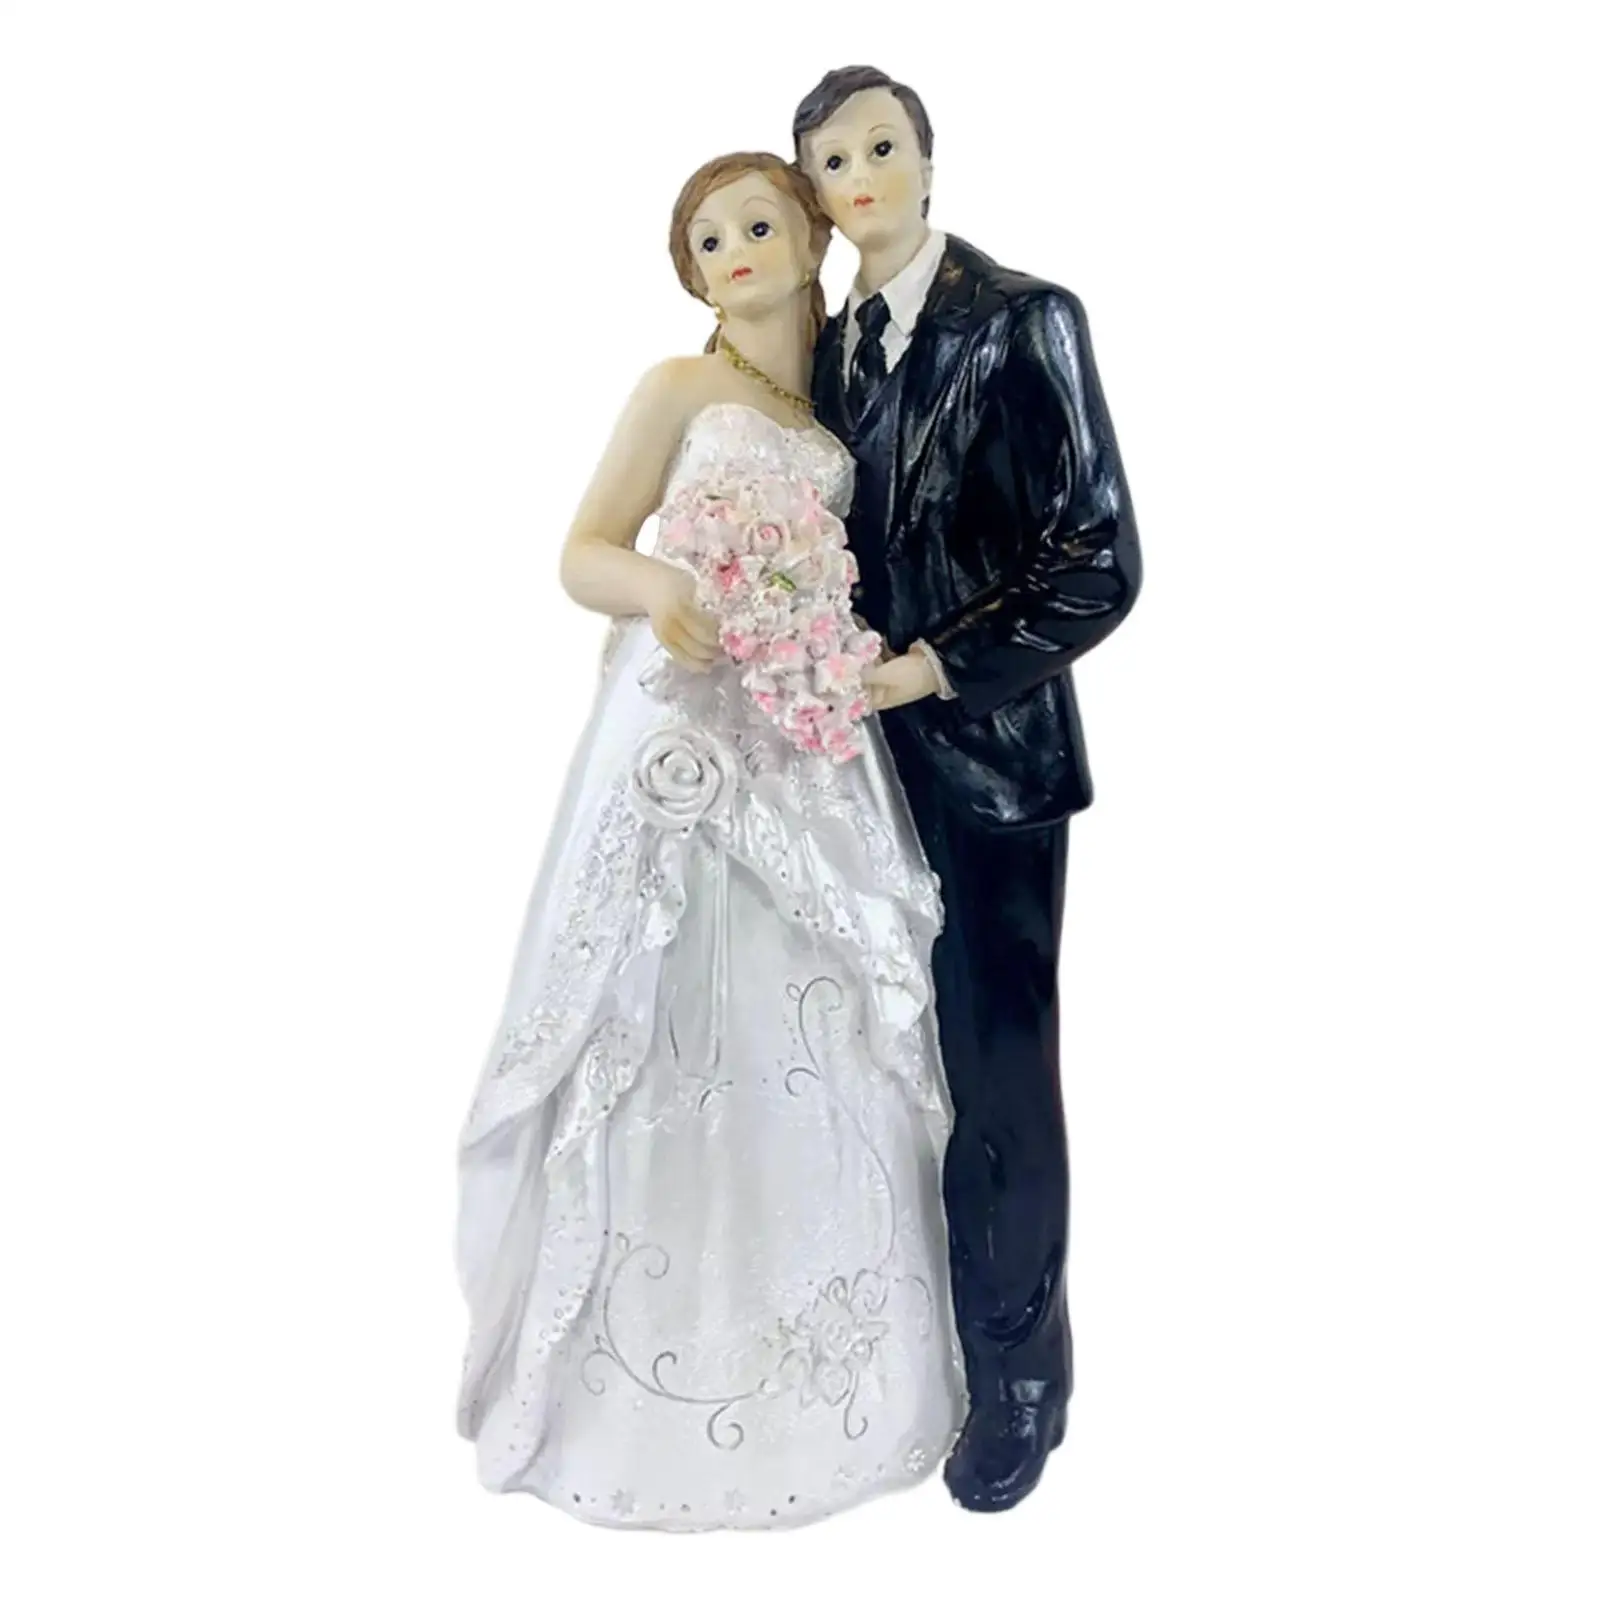 Wedding Decoration Couple Statue Figurines Ornaments For Home Wedding Favors Gift Valentines Day Present Various Styles